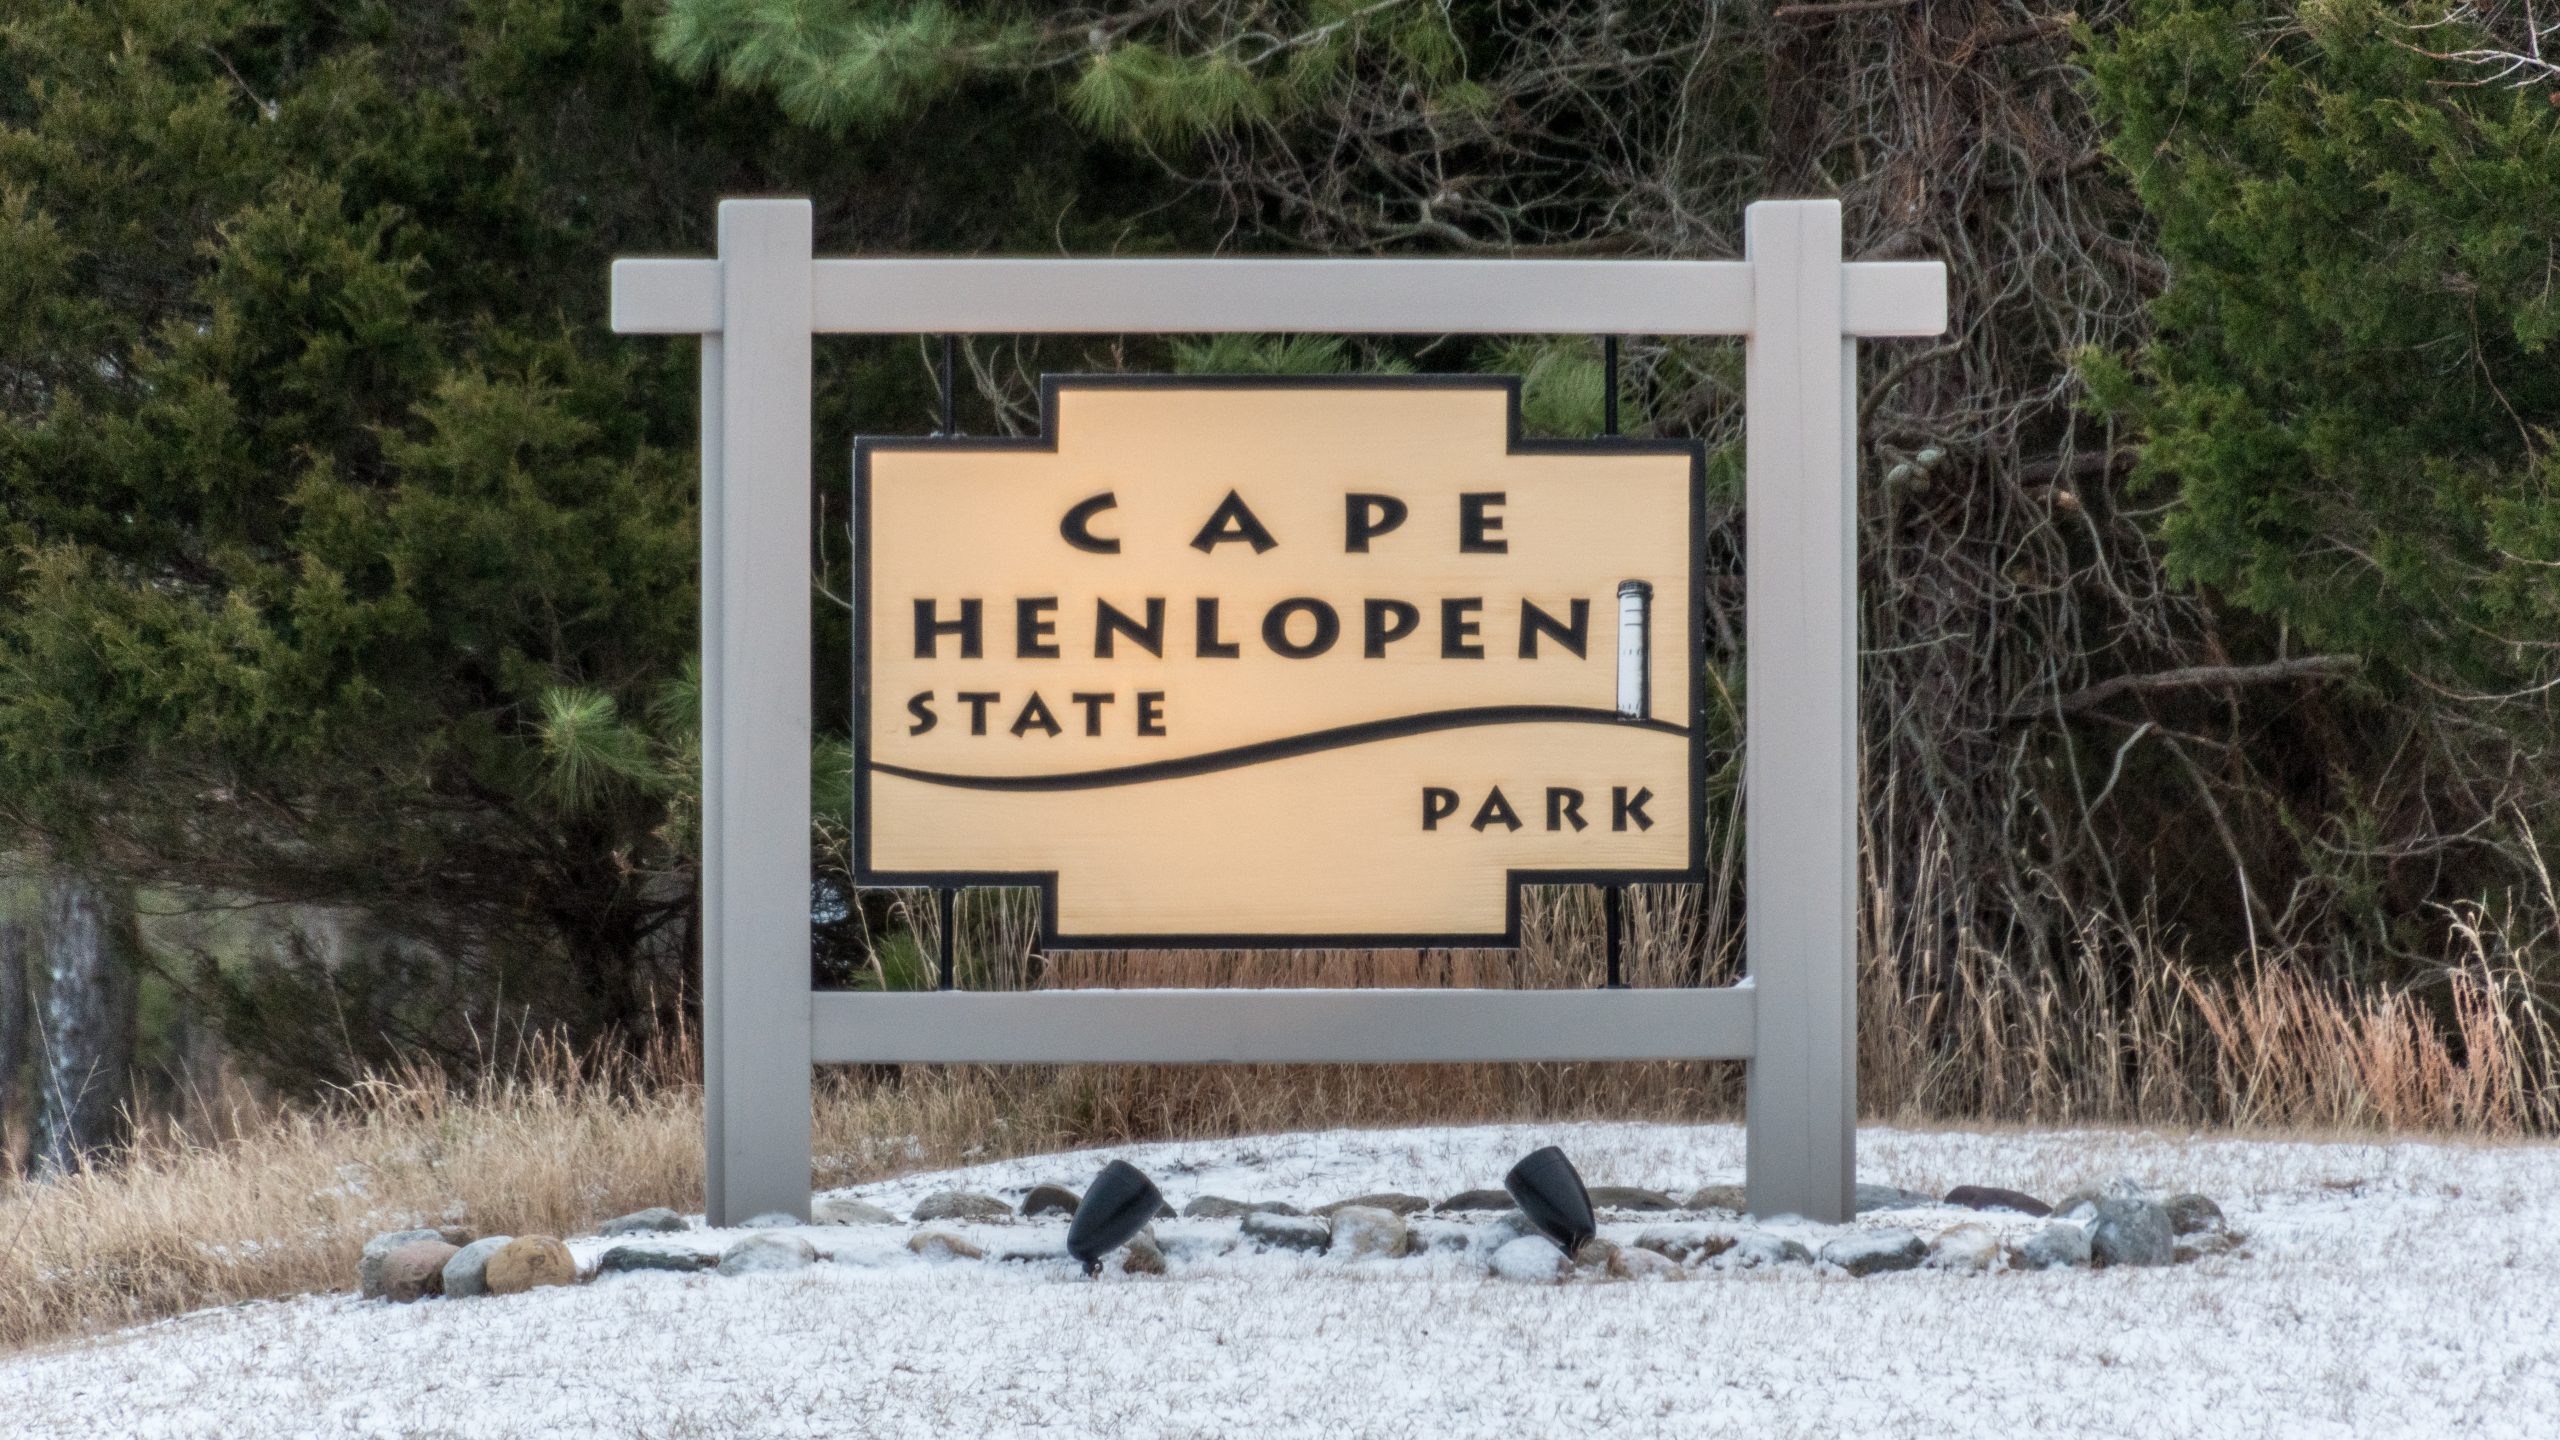 A wood Cape Henloepn State Park signs stands in the center of the photo surrounded by a snowy ground in the forefront and trees in the background.